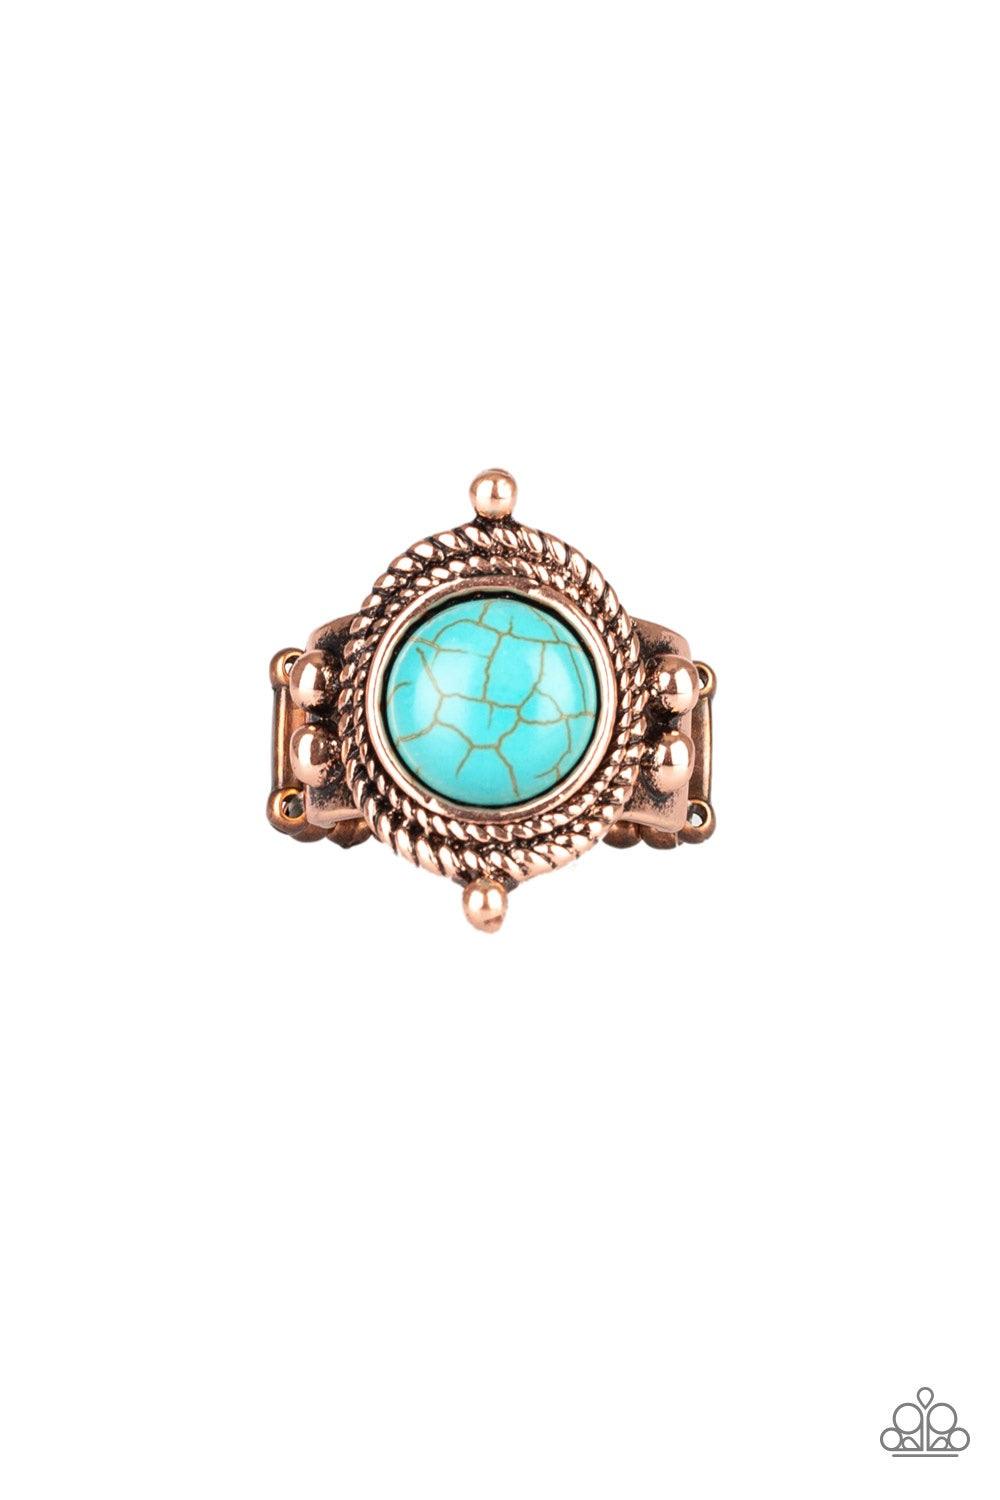 Paparazzi Accessories Prone To Wonder - Copper A refreshing turquoise stone is pressed into the center of a copper frame radiating with studded and twisted rope-like textures for an artisan inspired look. Features a stretchy band for a flexible fit. Jewel